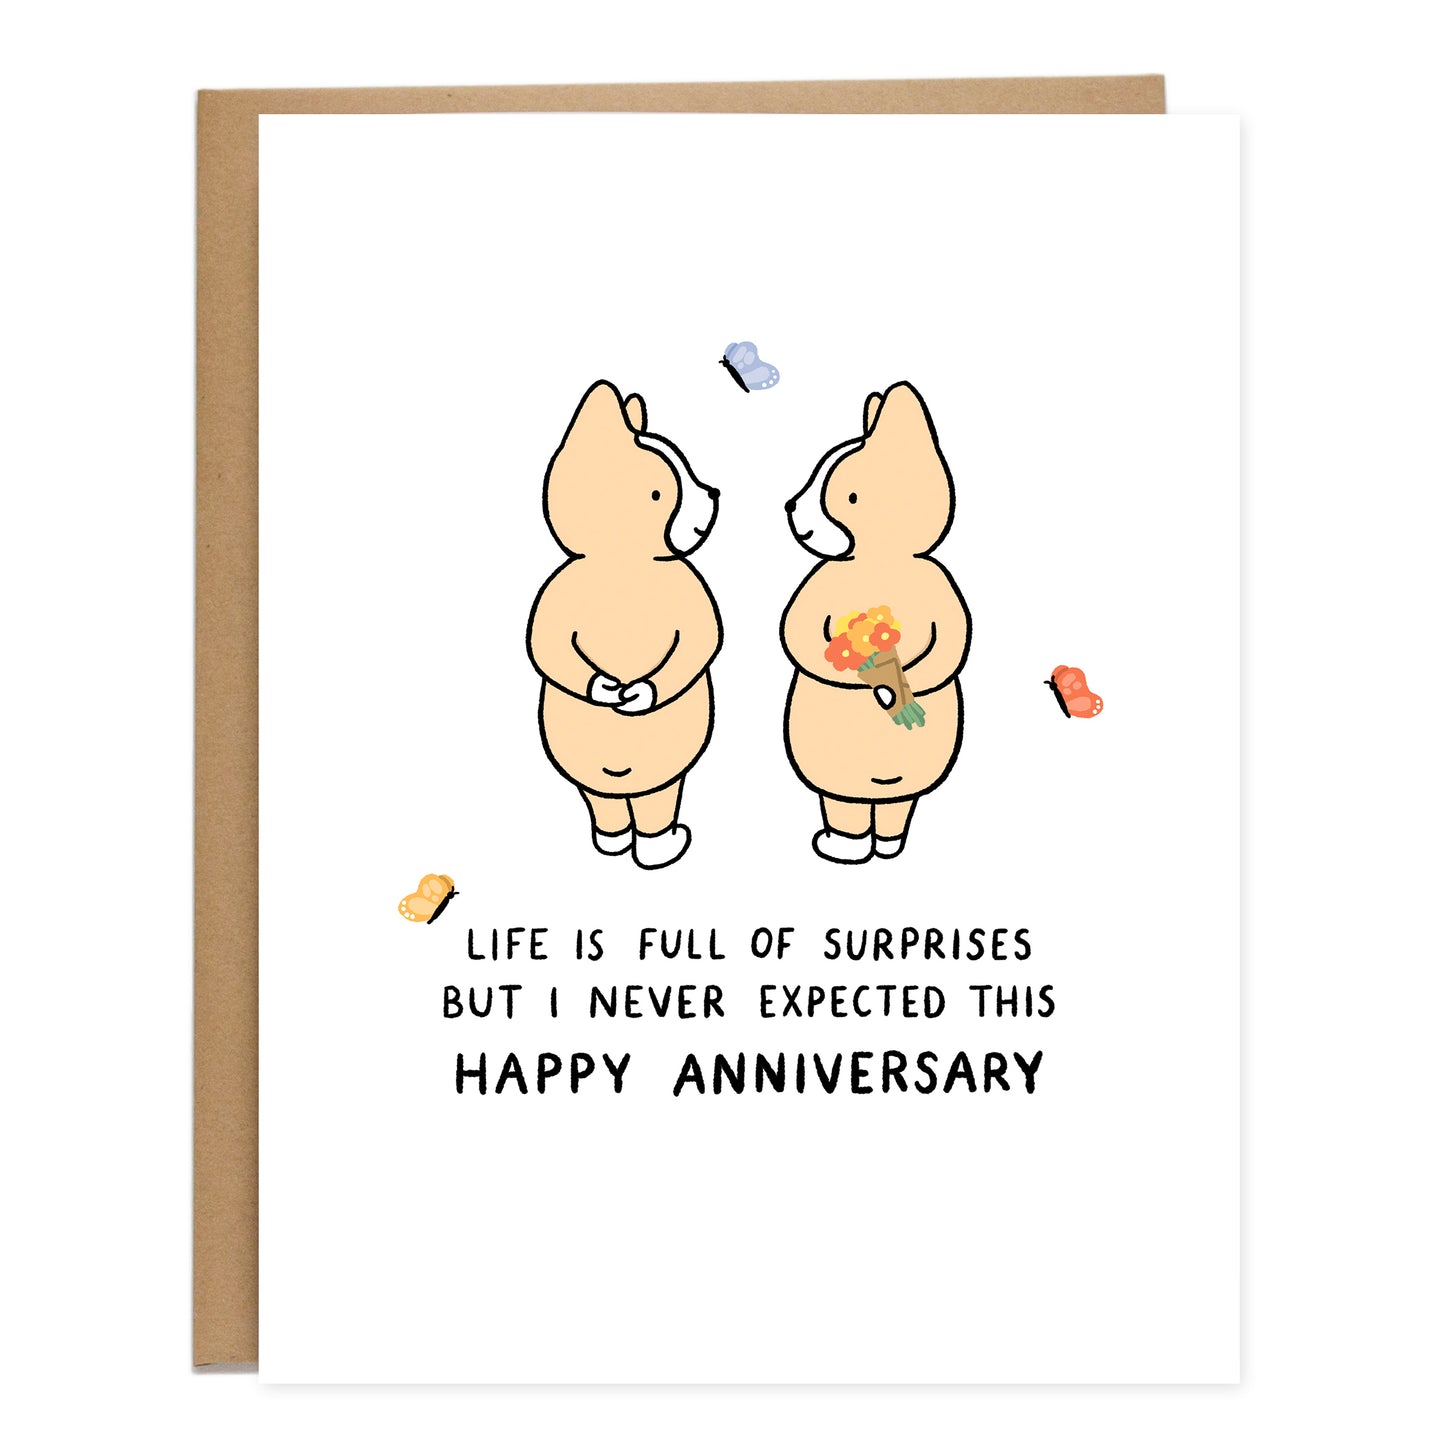 A drawing of two corgis standing with their hands behind their backs, and one corgi is holding a bouquet of flowers. Butterflies are around them and the text underneath reads, life is full of surprises but I never expected this, happy anniversary.